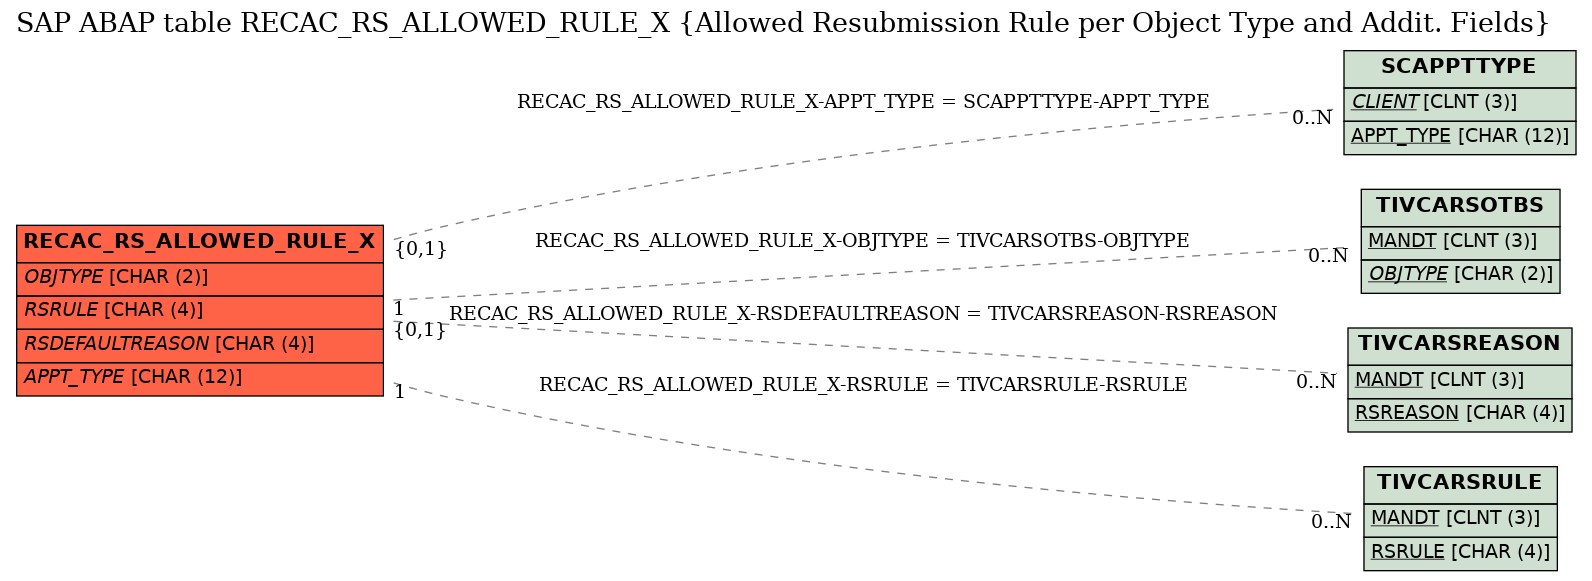 E-R Diagram for table RECAC_RS_ALLOWED_RULE_X (Allowed Resubmission Rule per Object Type and Addit. Fields)